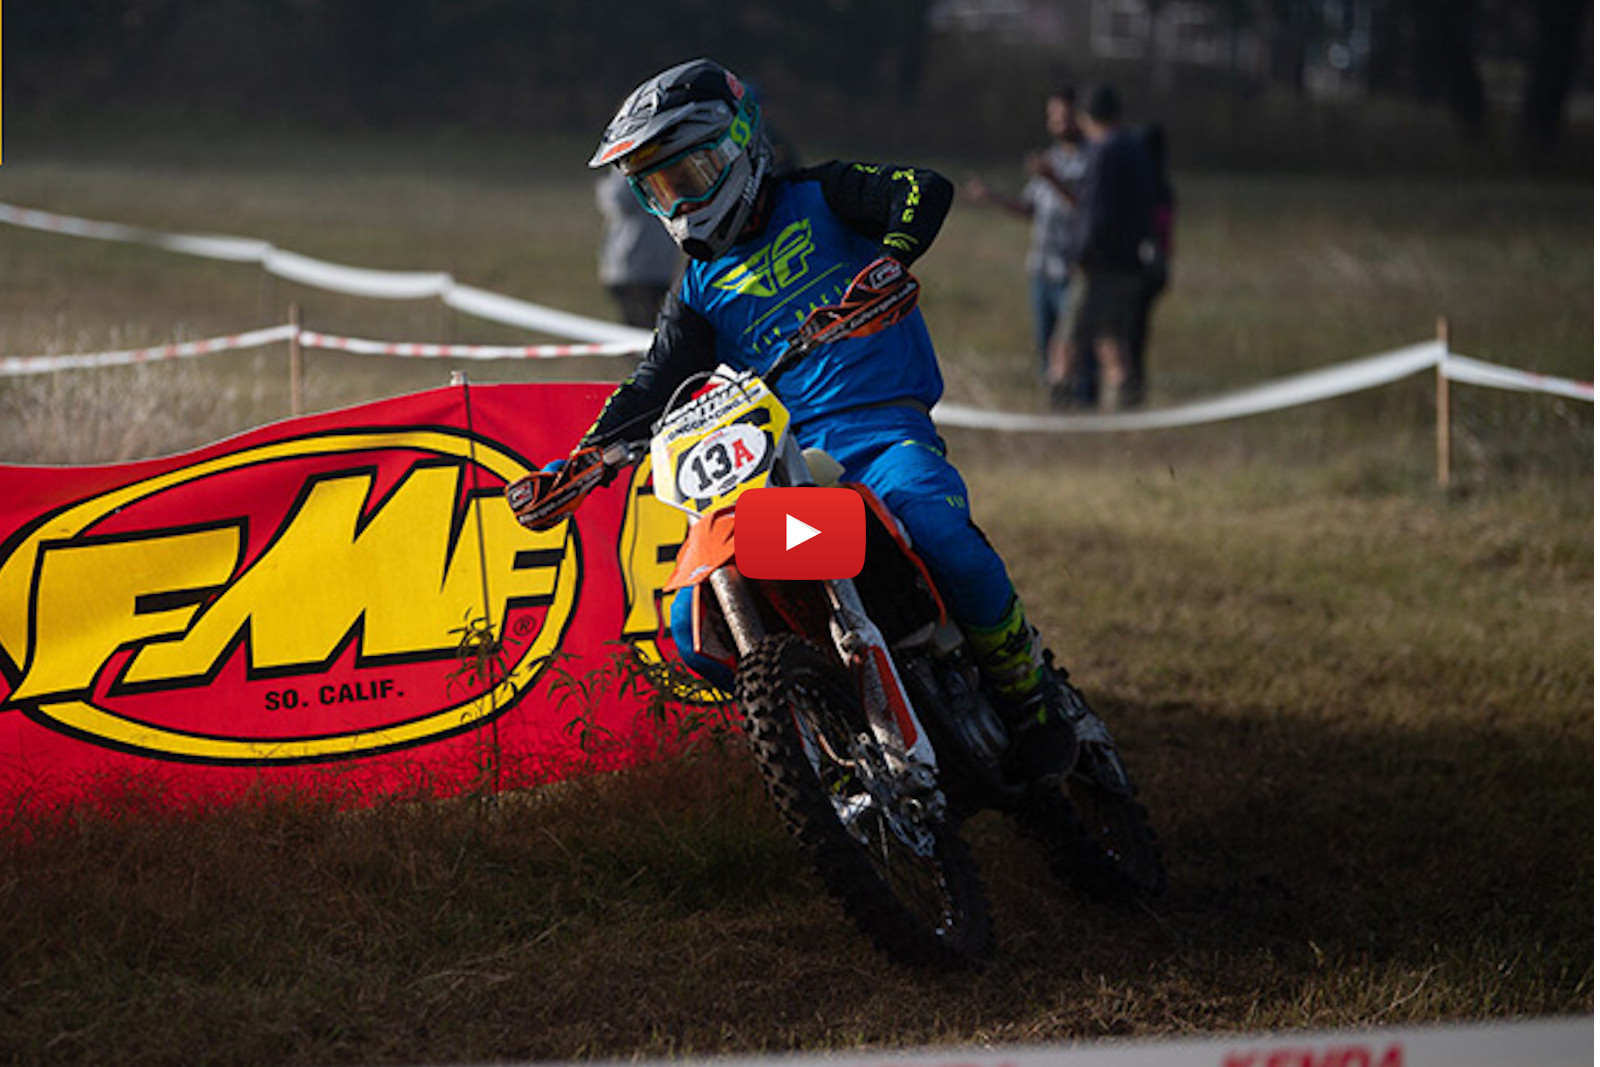 Event Highlishts: Zink Ranch National Enduro – Flat grass tests in the USA? What?!